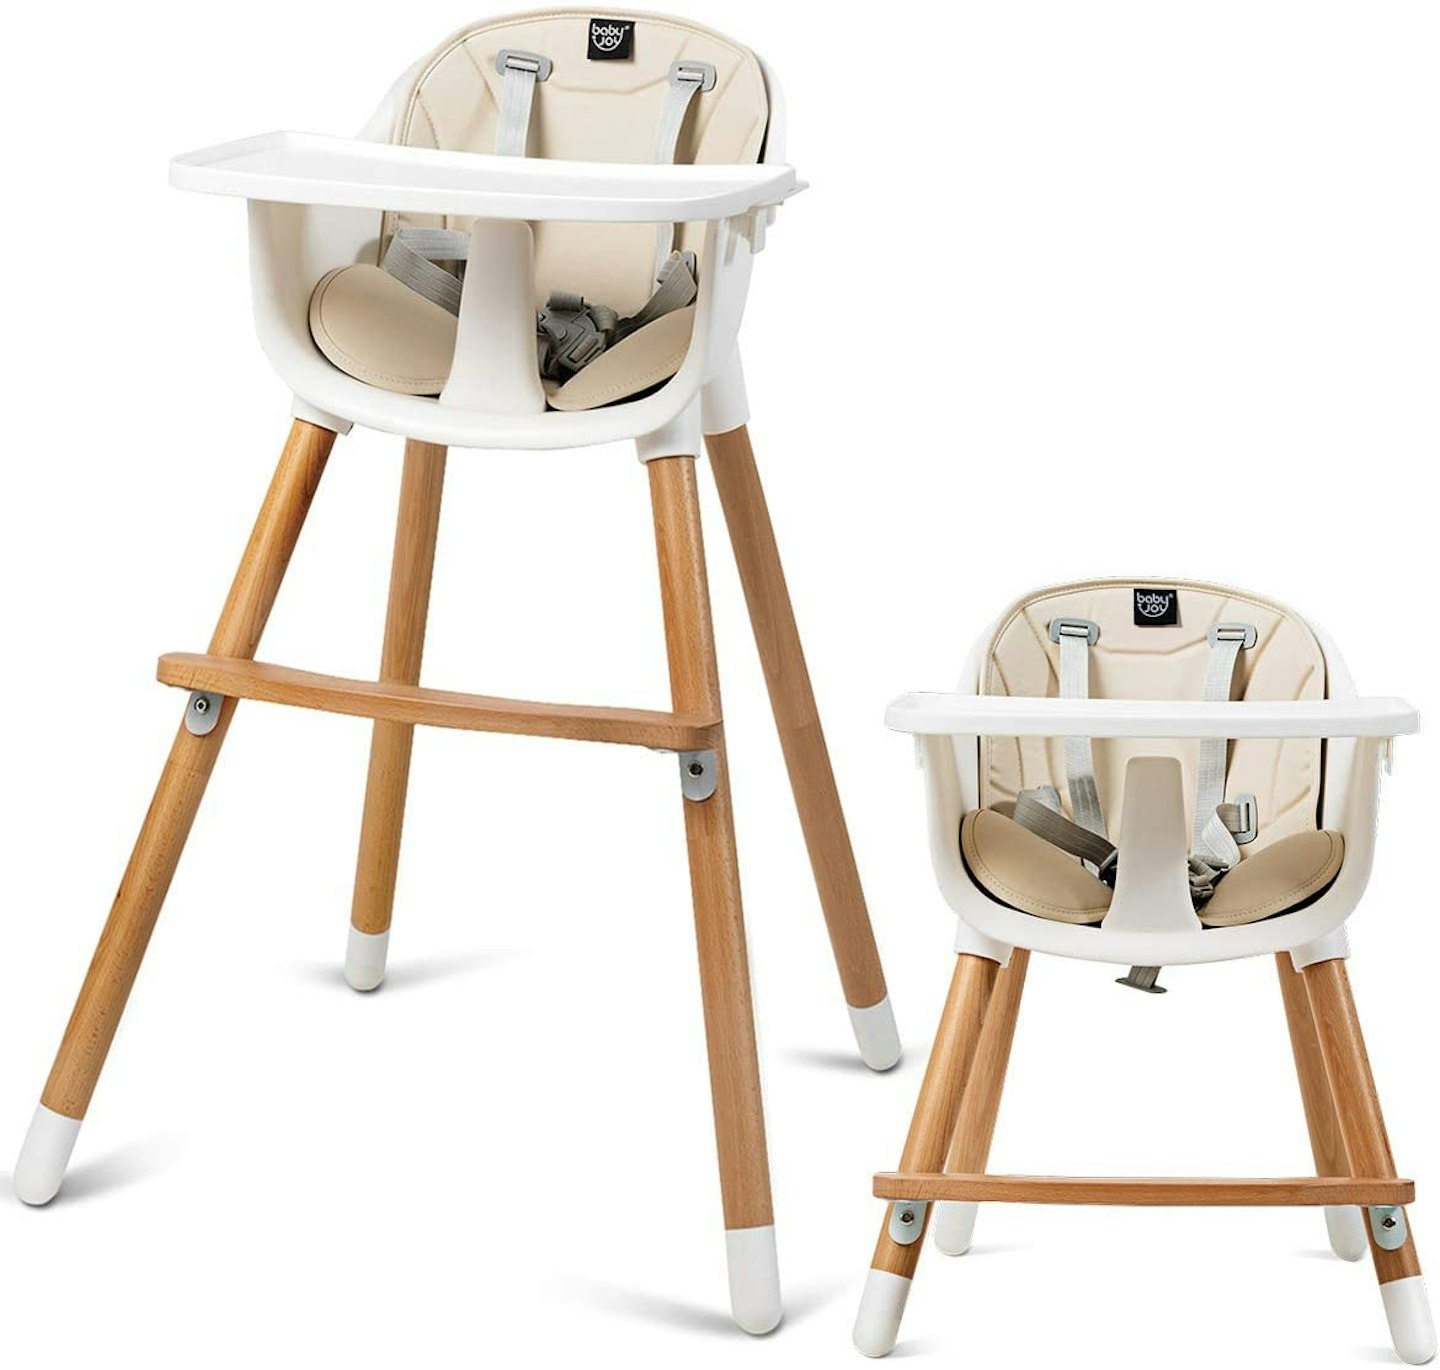 COSTWAY Baby High Chair, 3 in 1 Dining Chair